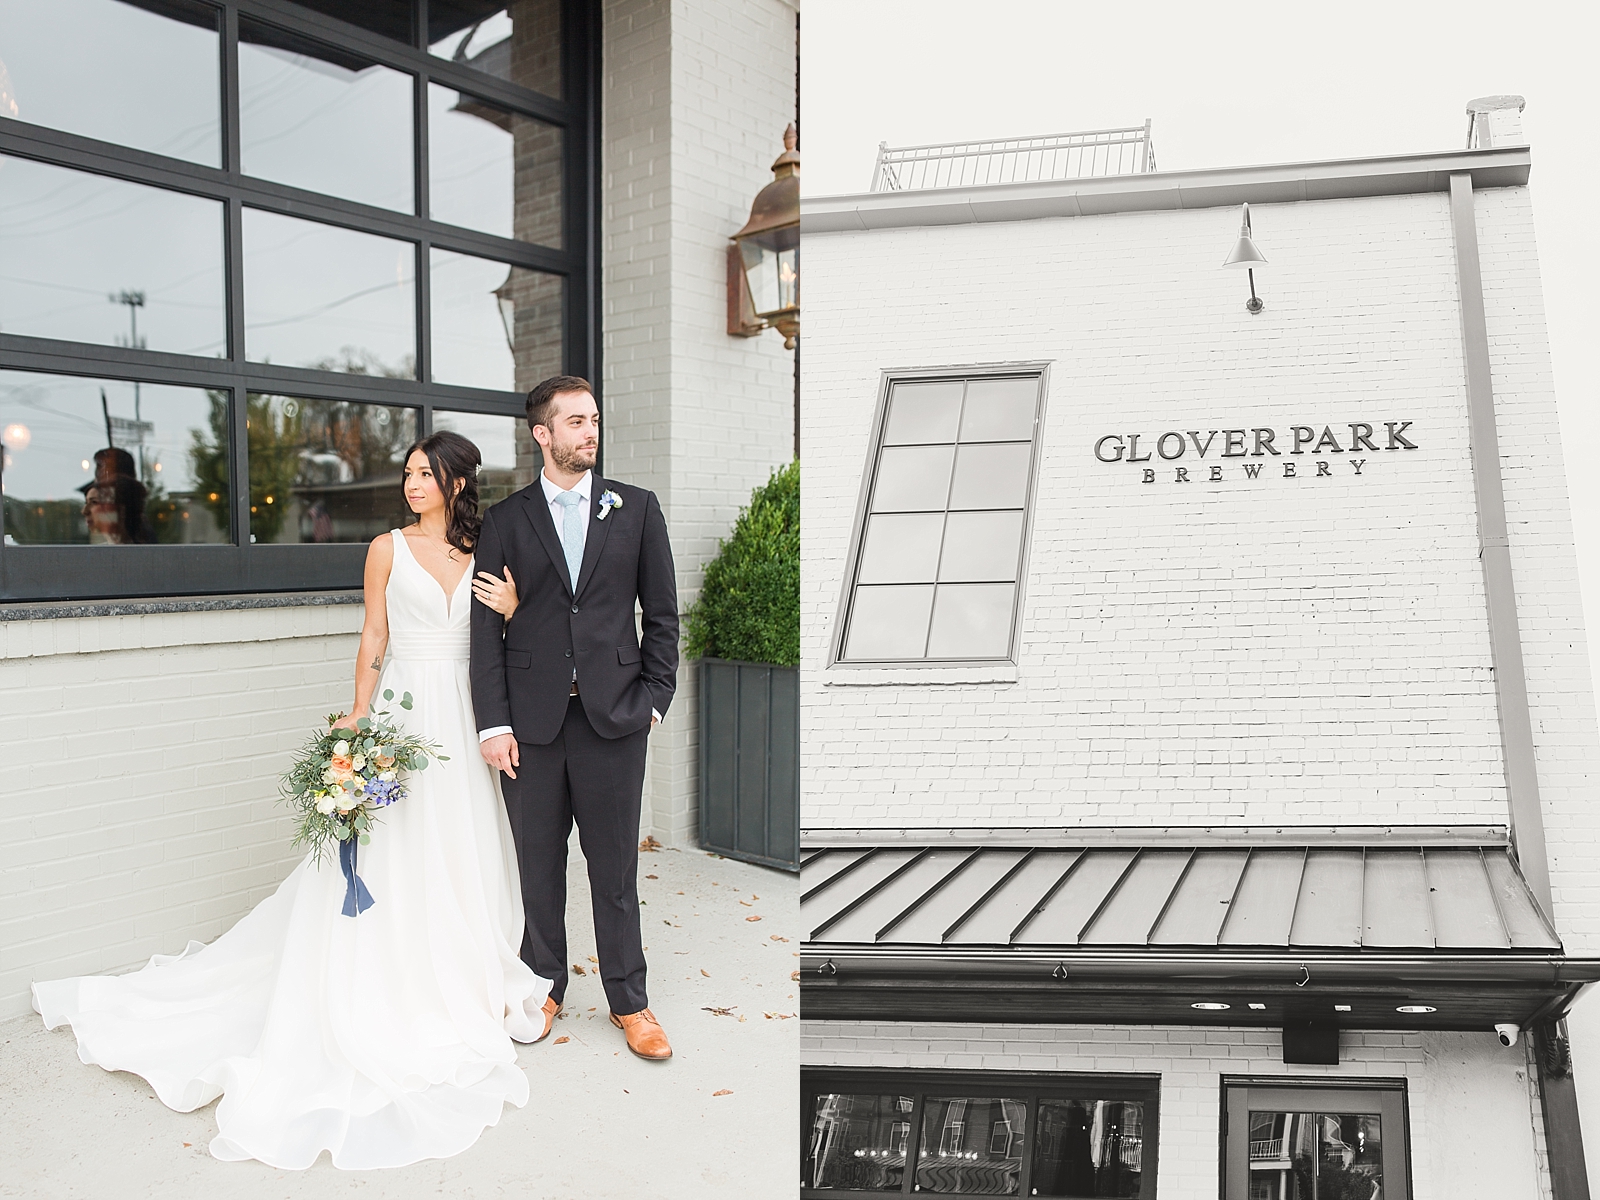 Glover Park Brewery Wedding Bride and Groom in front of venue looking opposite ways and black and white of venue building Photos